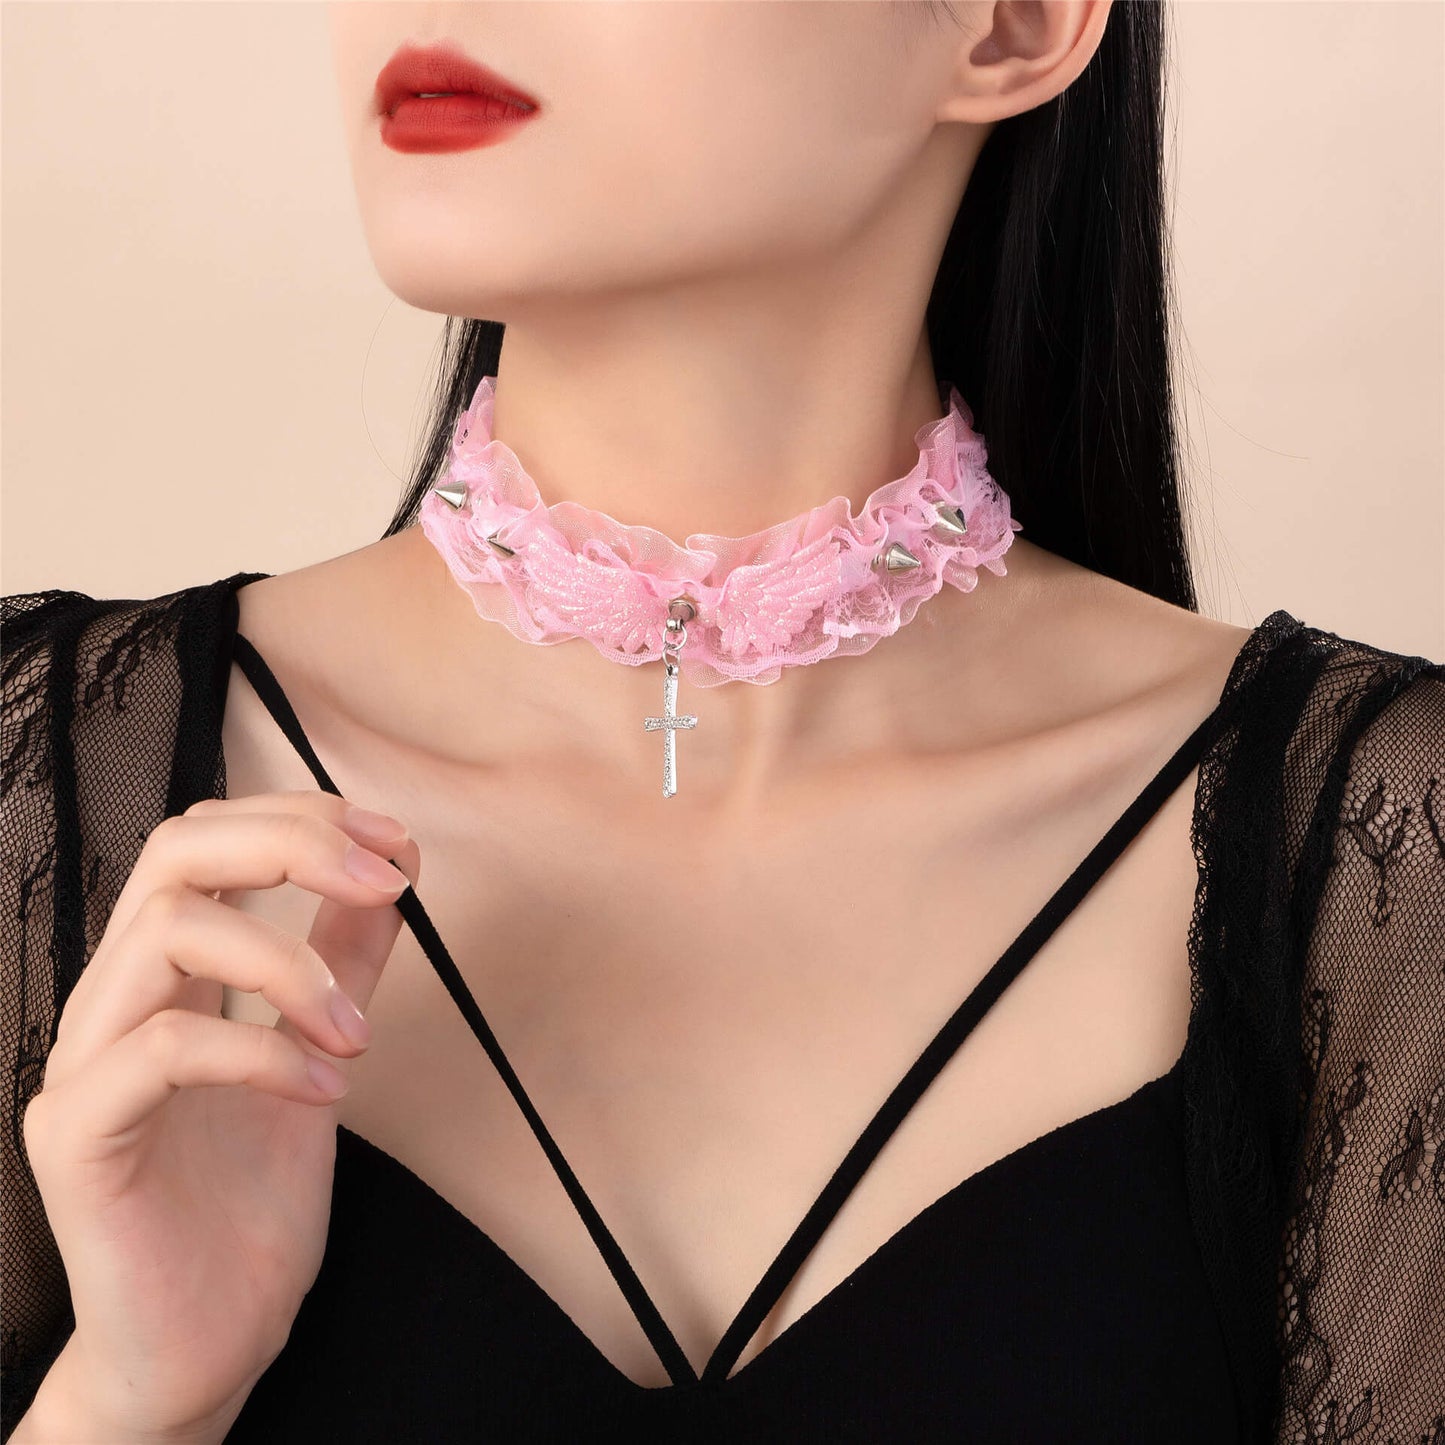 Pink Choker Necklace With A Cross - Femboy Fashion